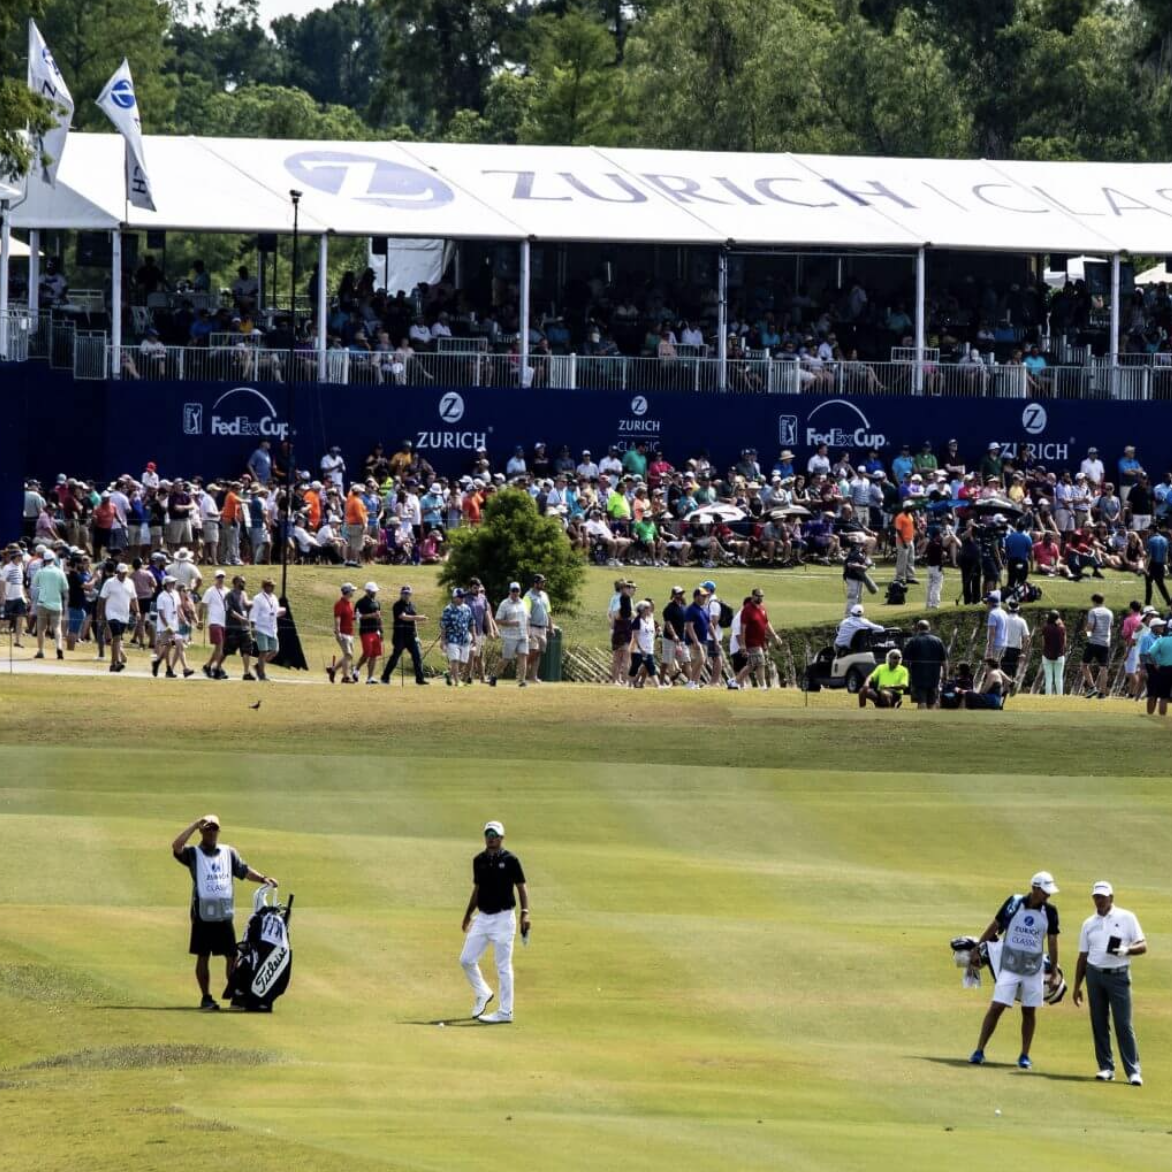 A look down the fairway at the Zurich Classic